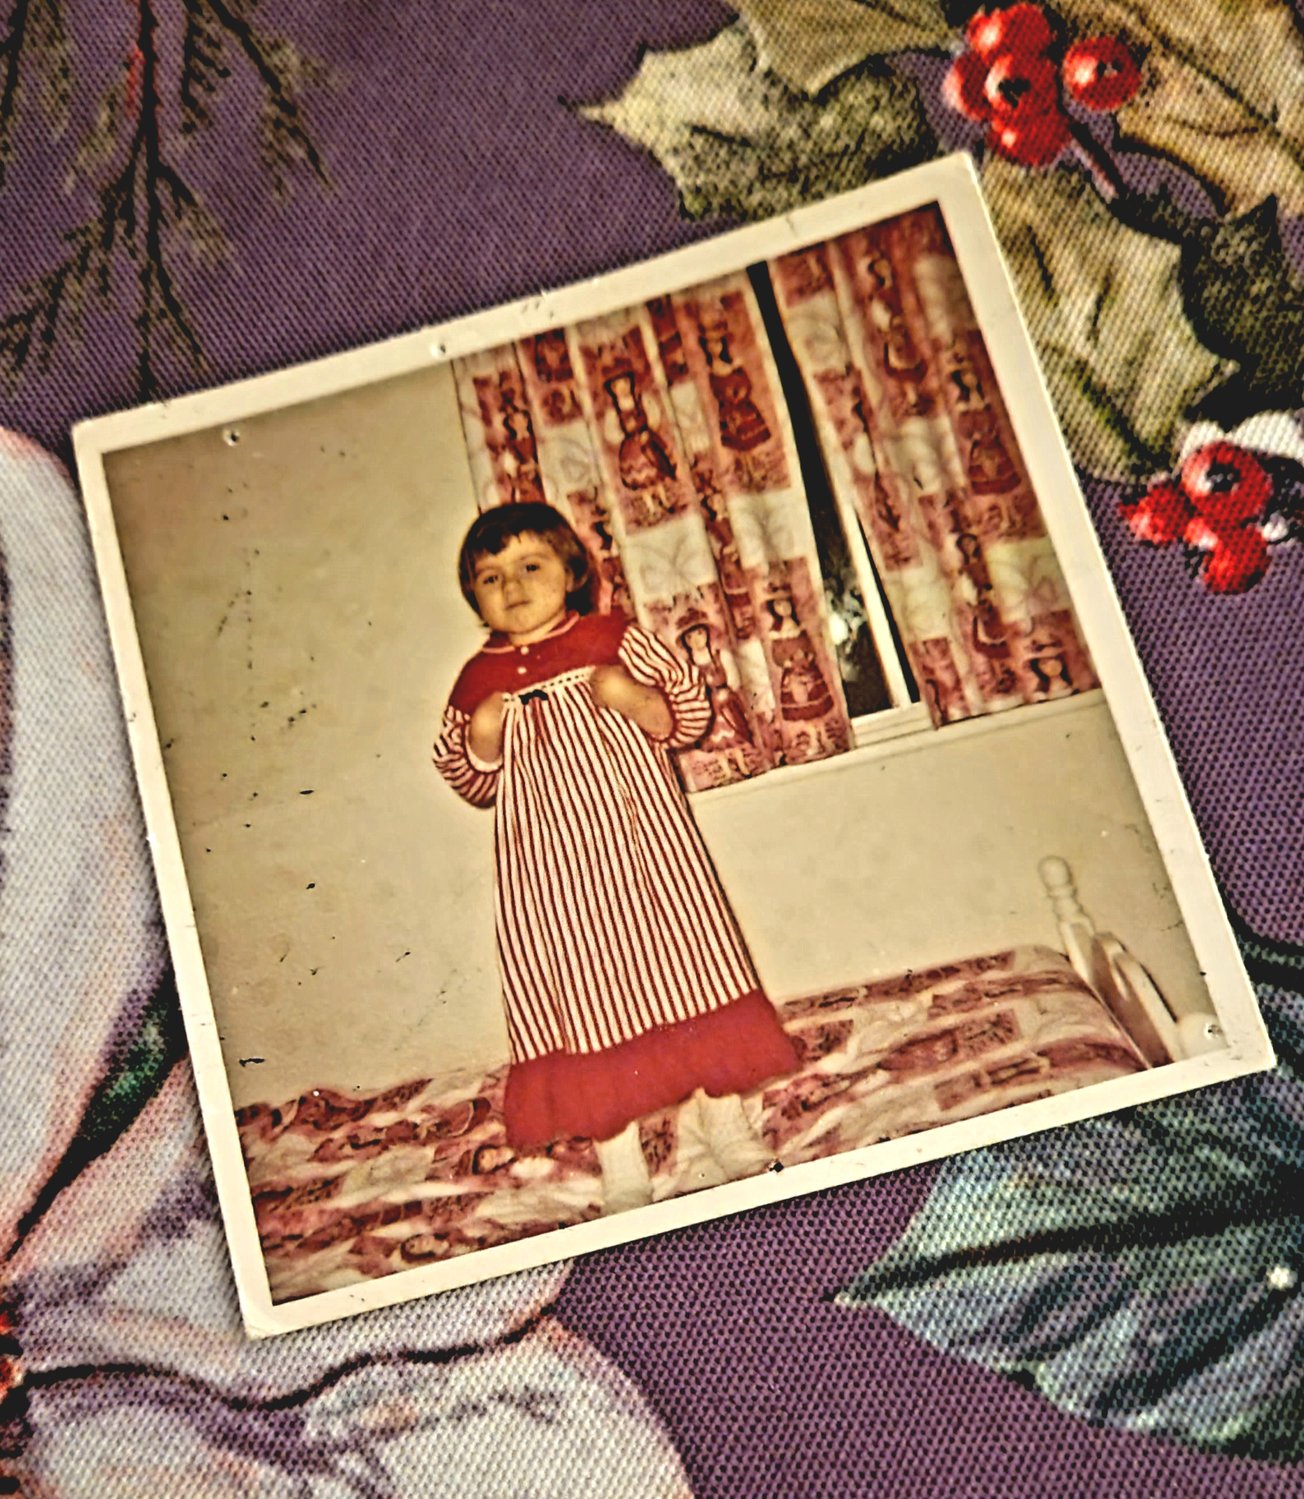 The author during Christmas at age 4.